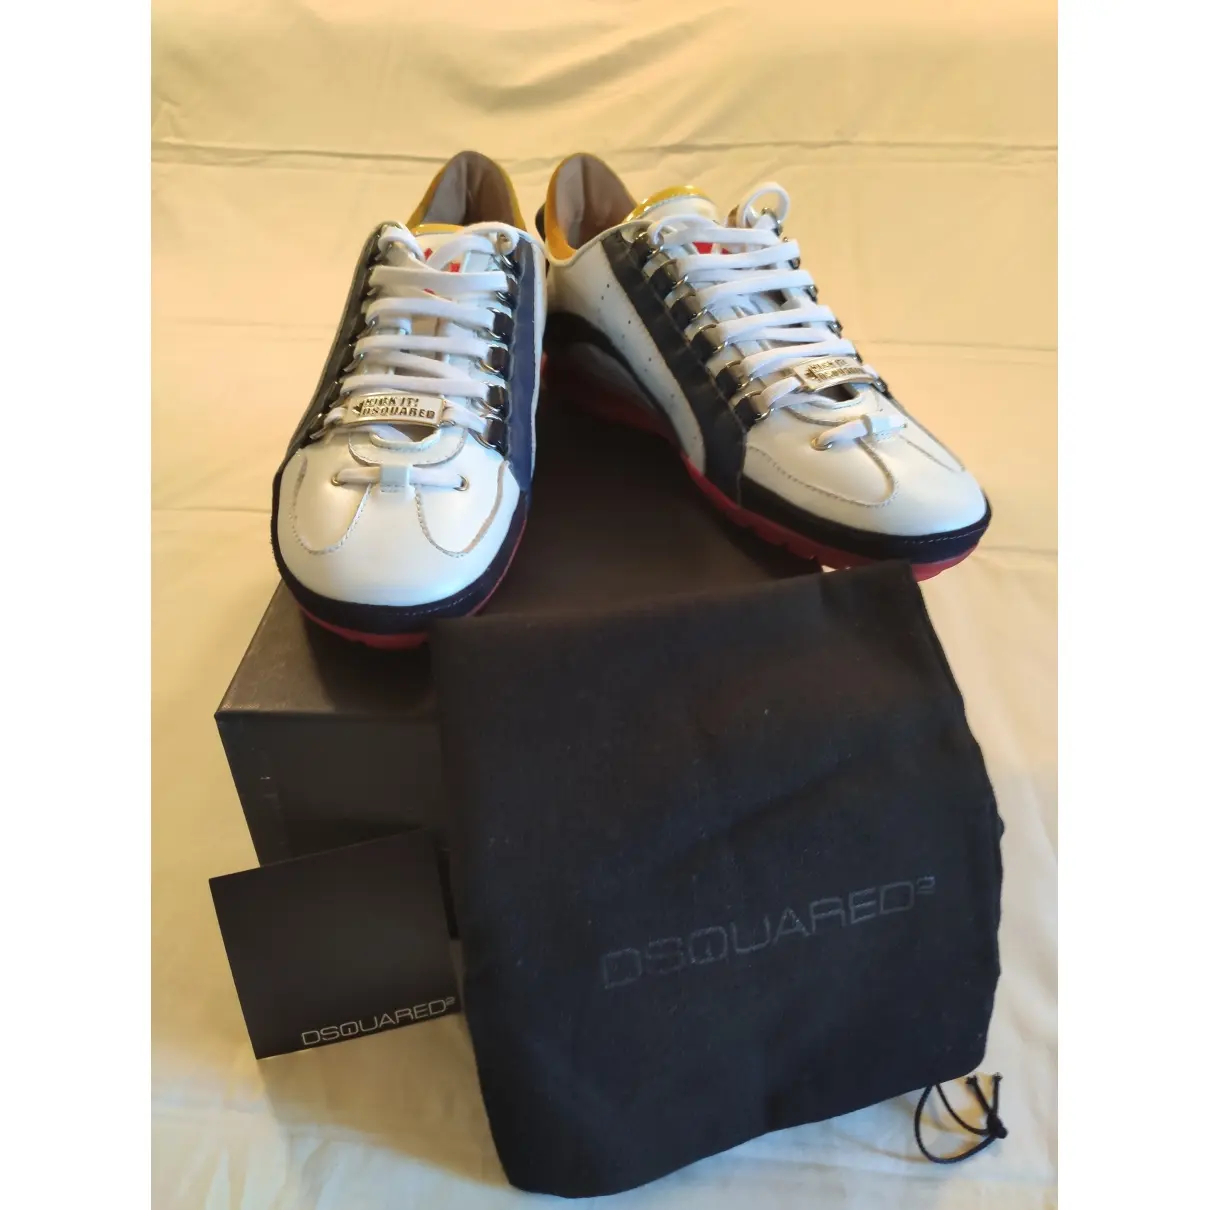 Buy Dsquared2 551 leather low trainers online